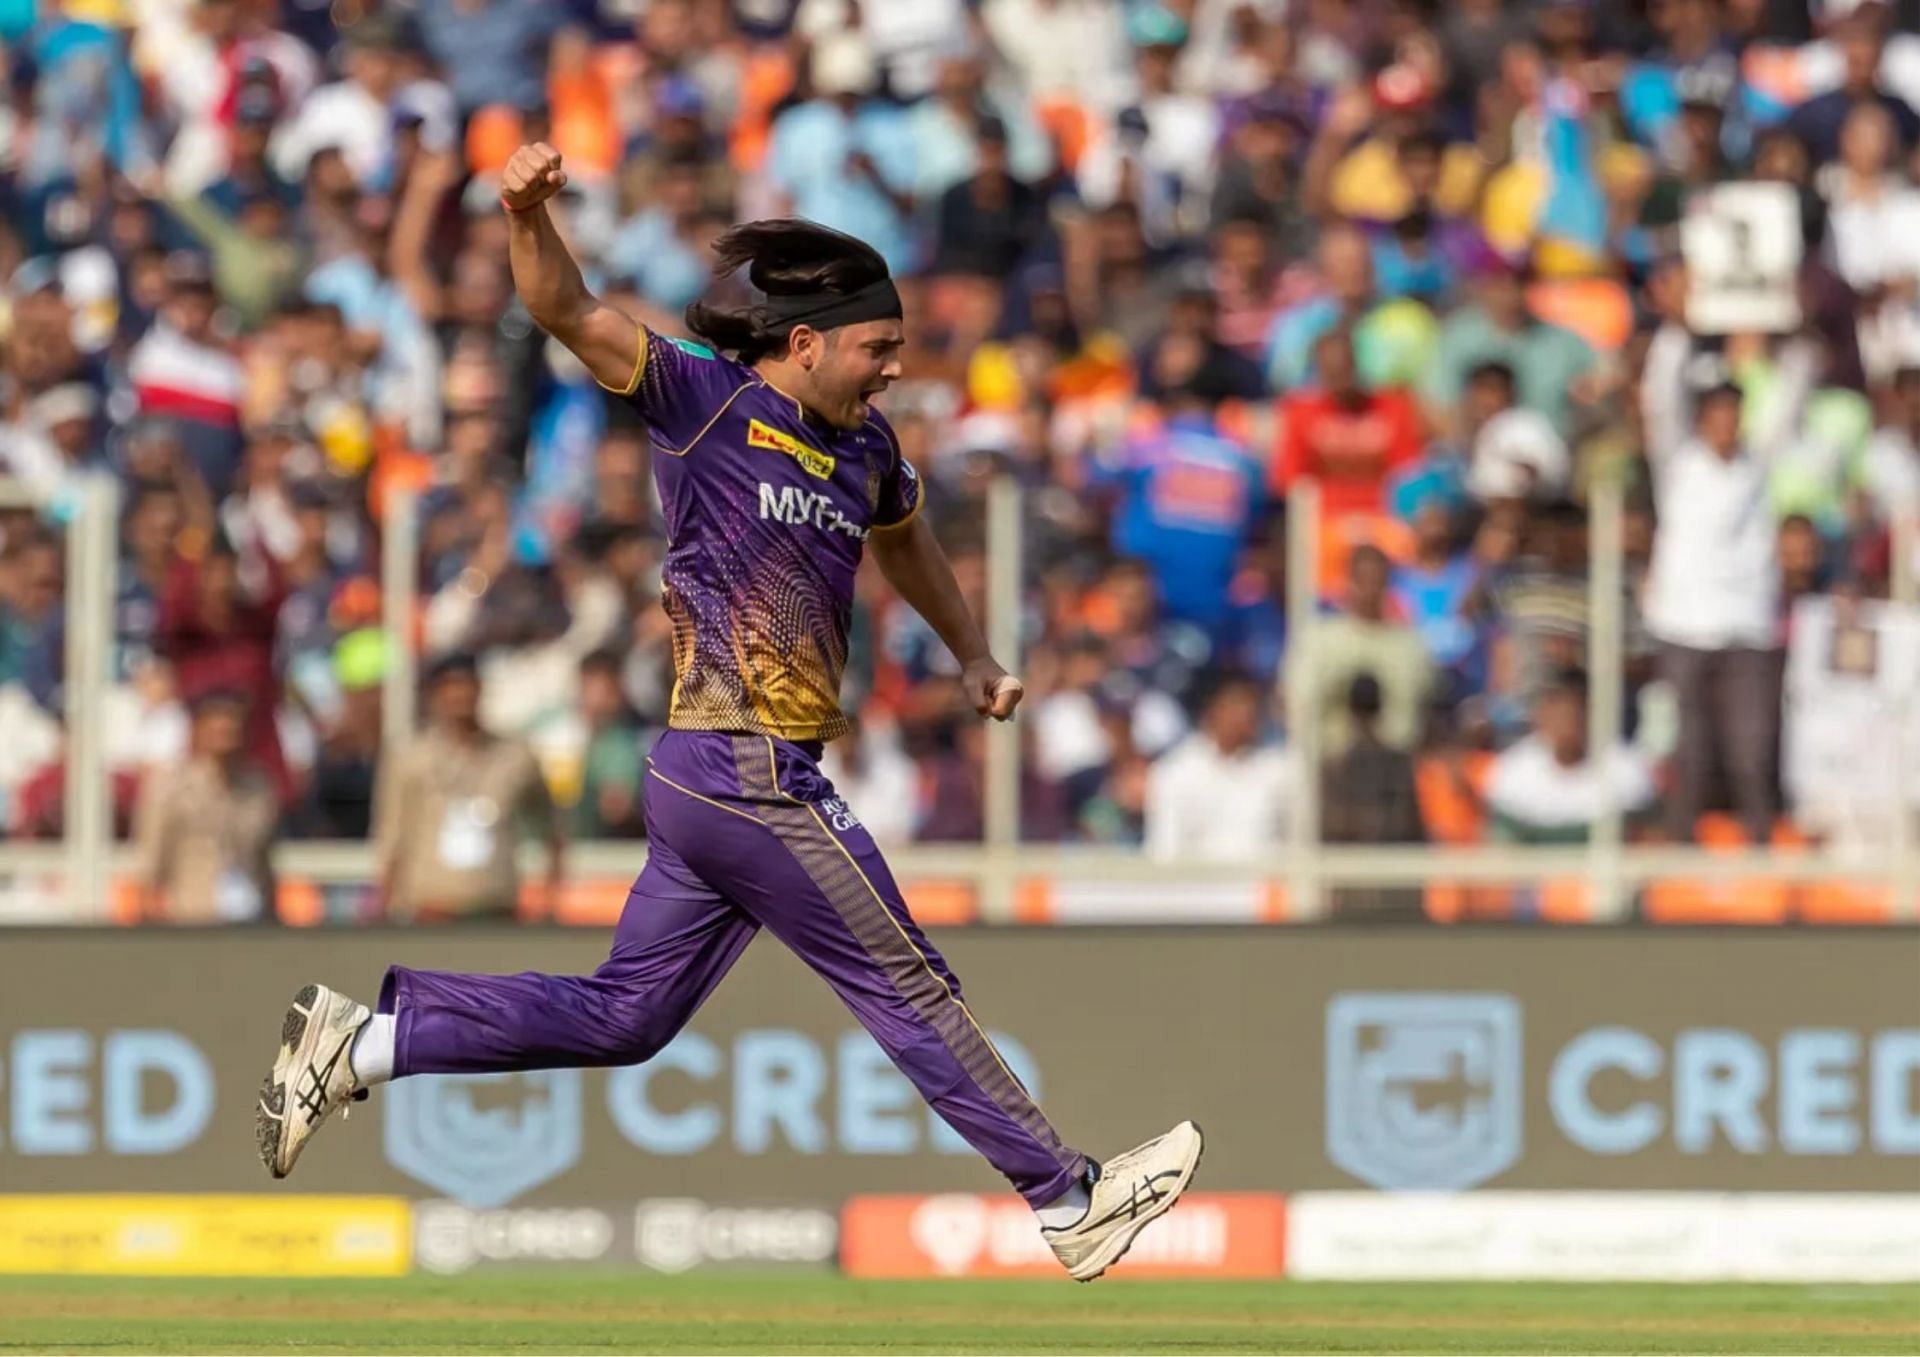 Suyash Sharma has been a revelation this season for KKR (Picture Credits: BCCI).